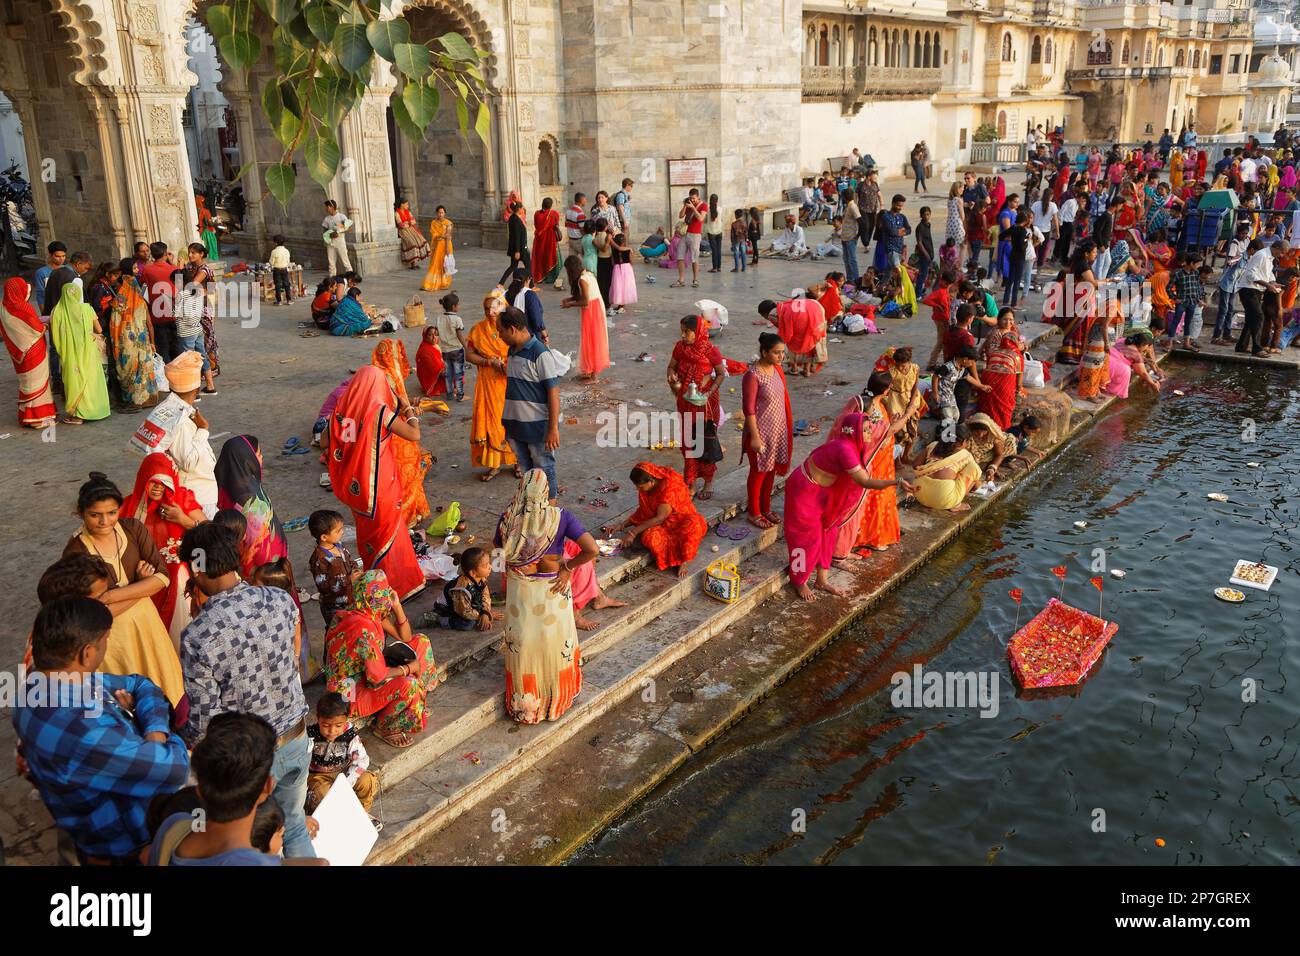 UDAIPUR, INDIA, November 4, 2017 : People during a ceremony. On the full moon day, an Hindu ceremony of light stands on banks of the lake of Udaipur Stock Photo